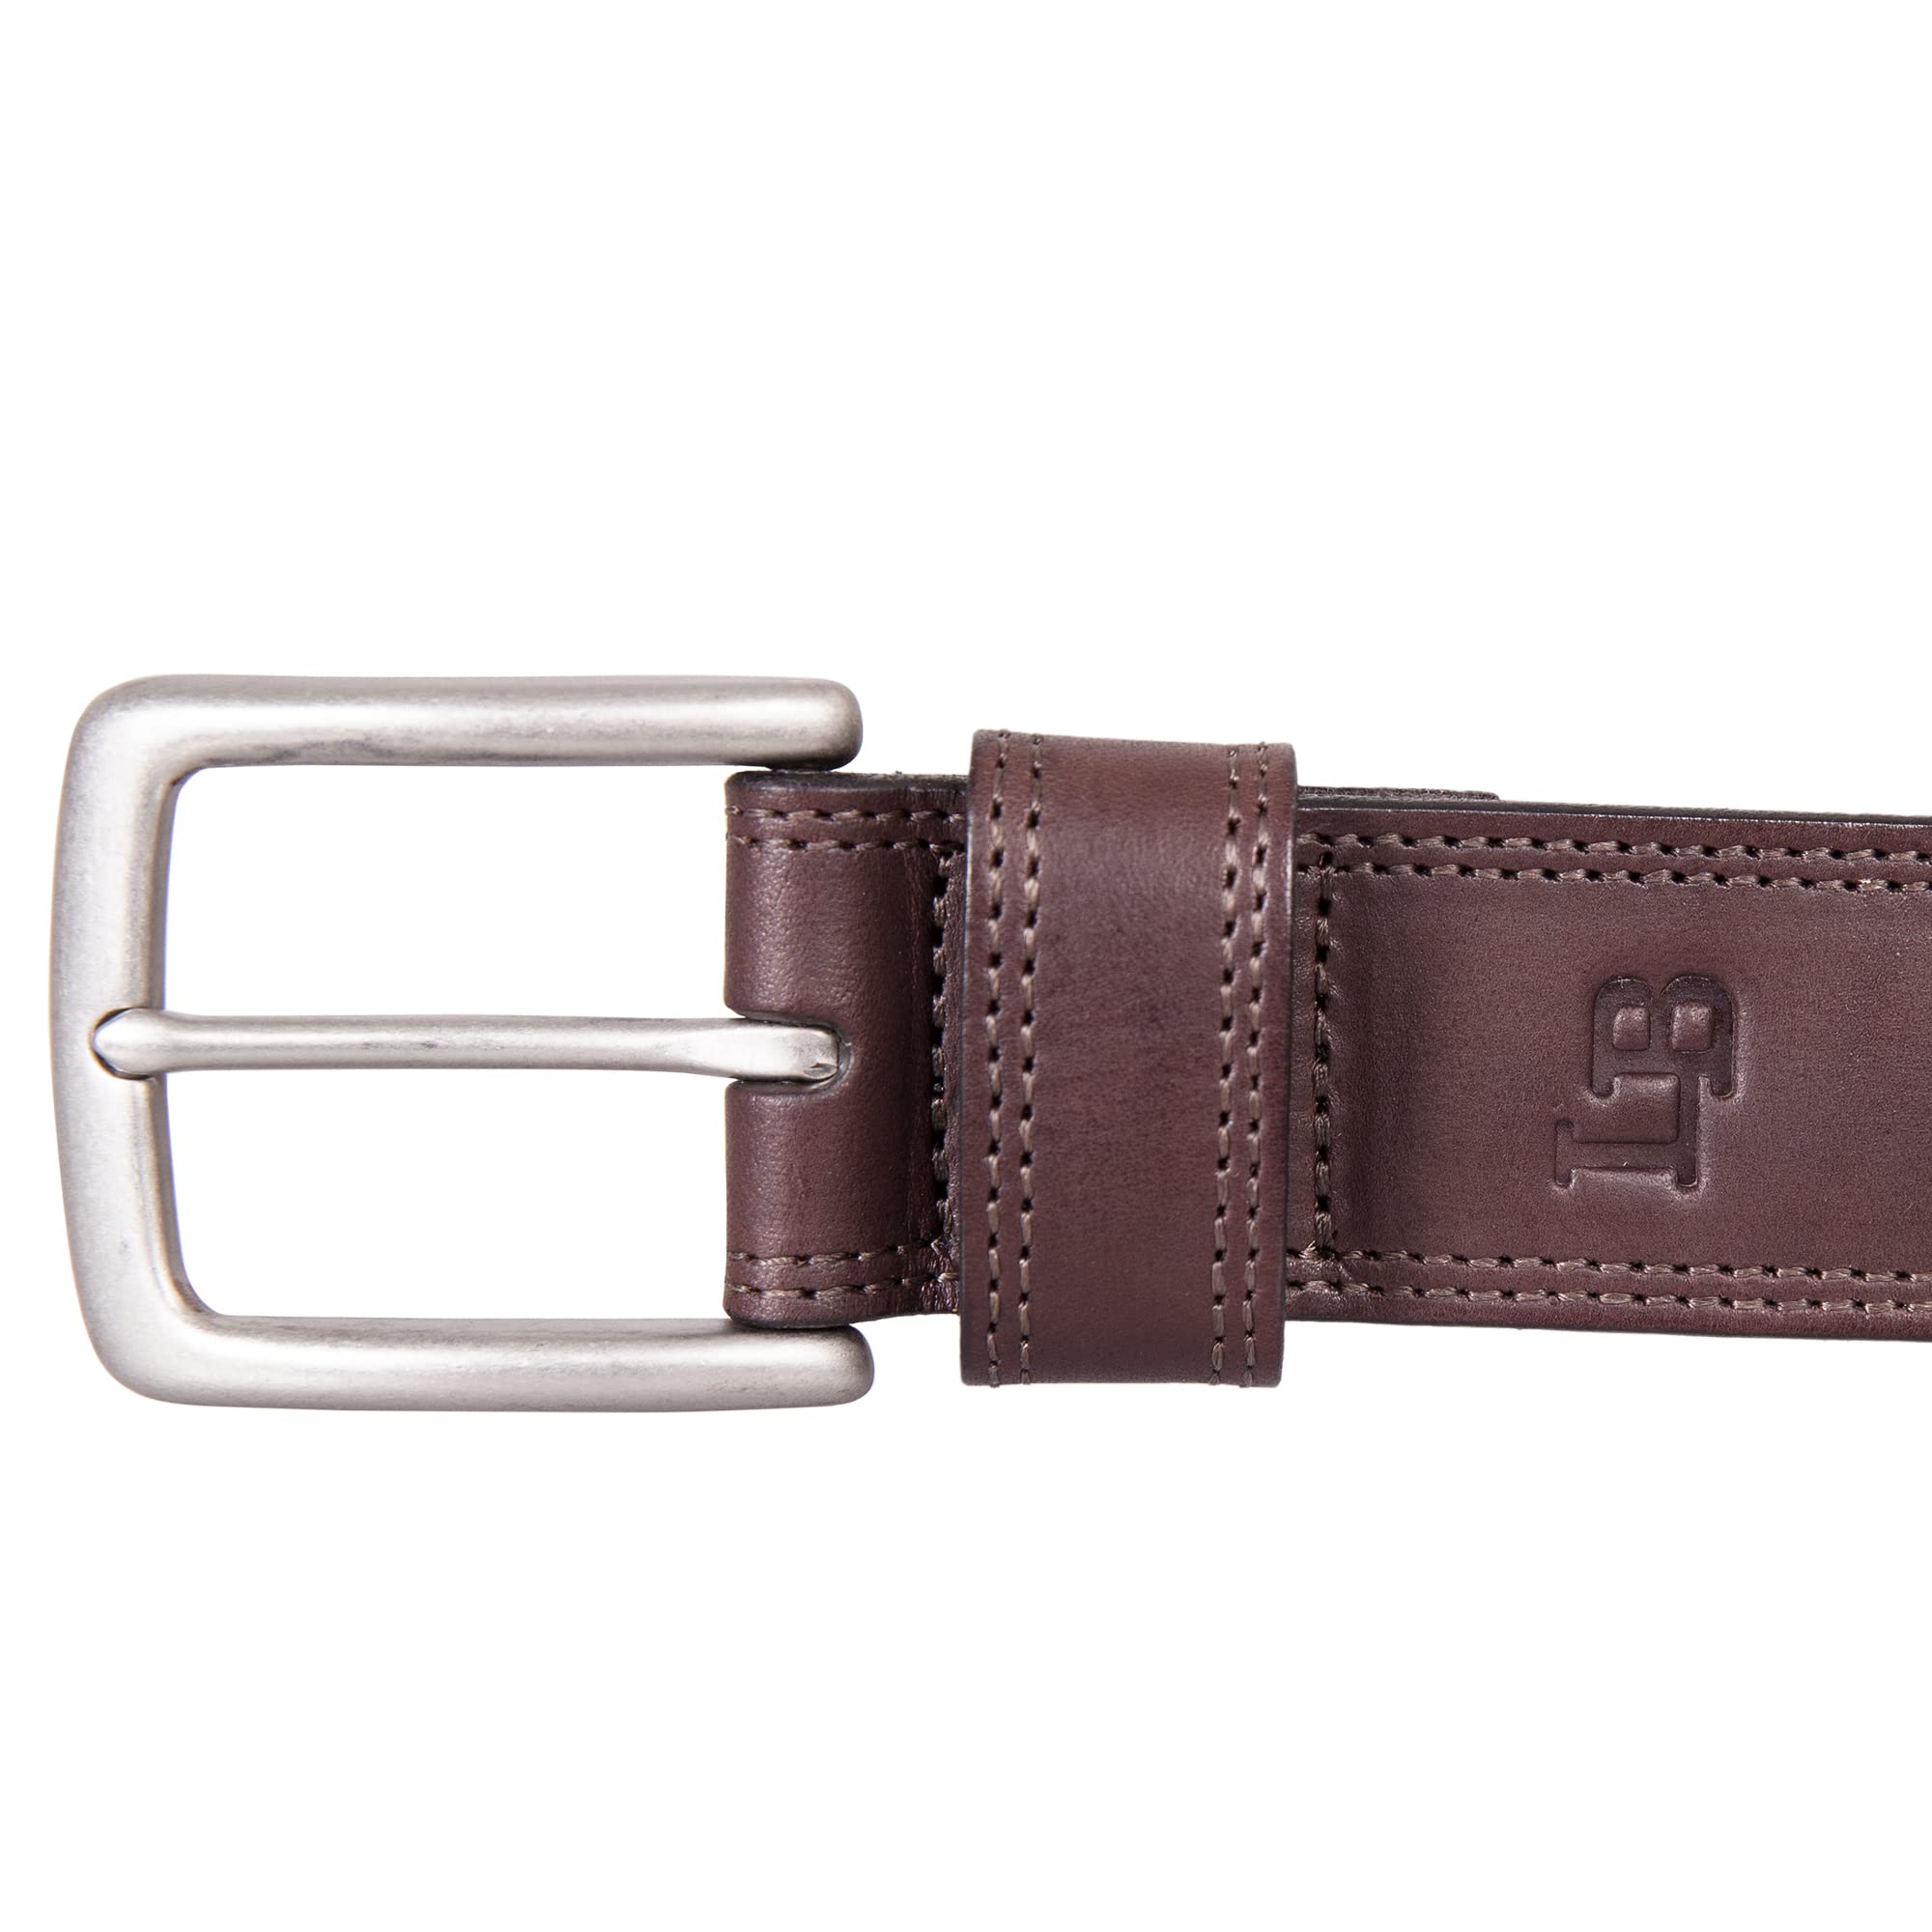 Lucky Brand Men's Double Needle Stitched Leather Belt with Nickel Finish Buckle